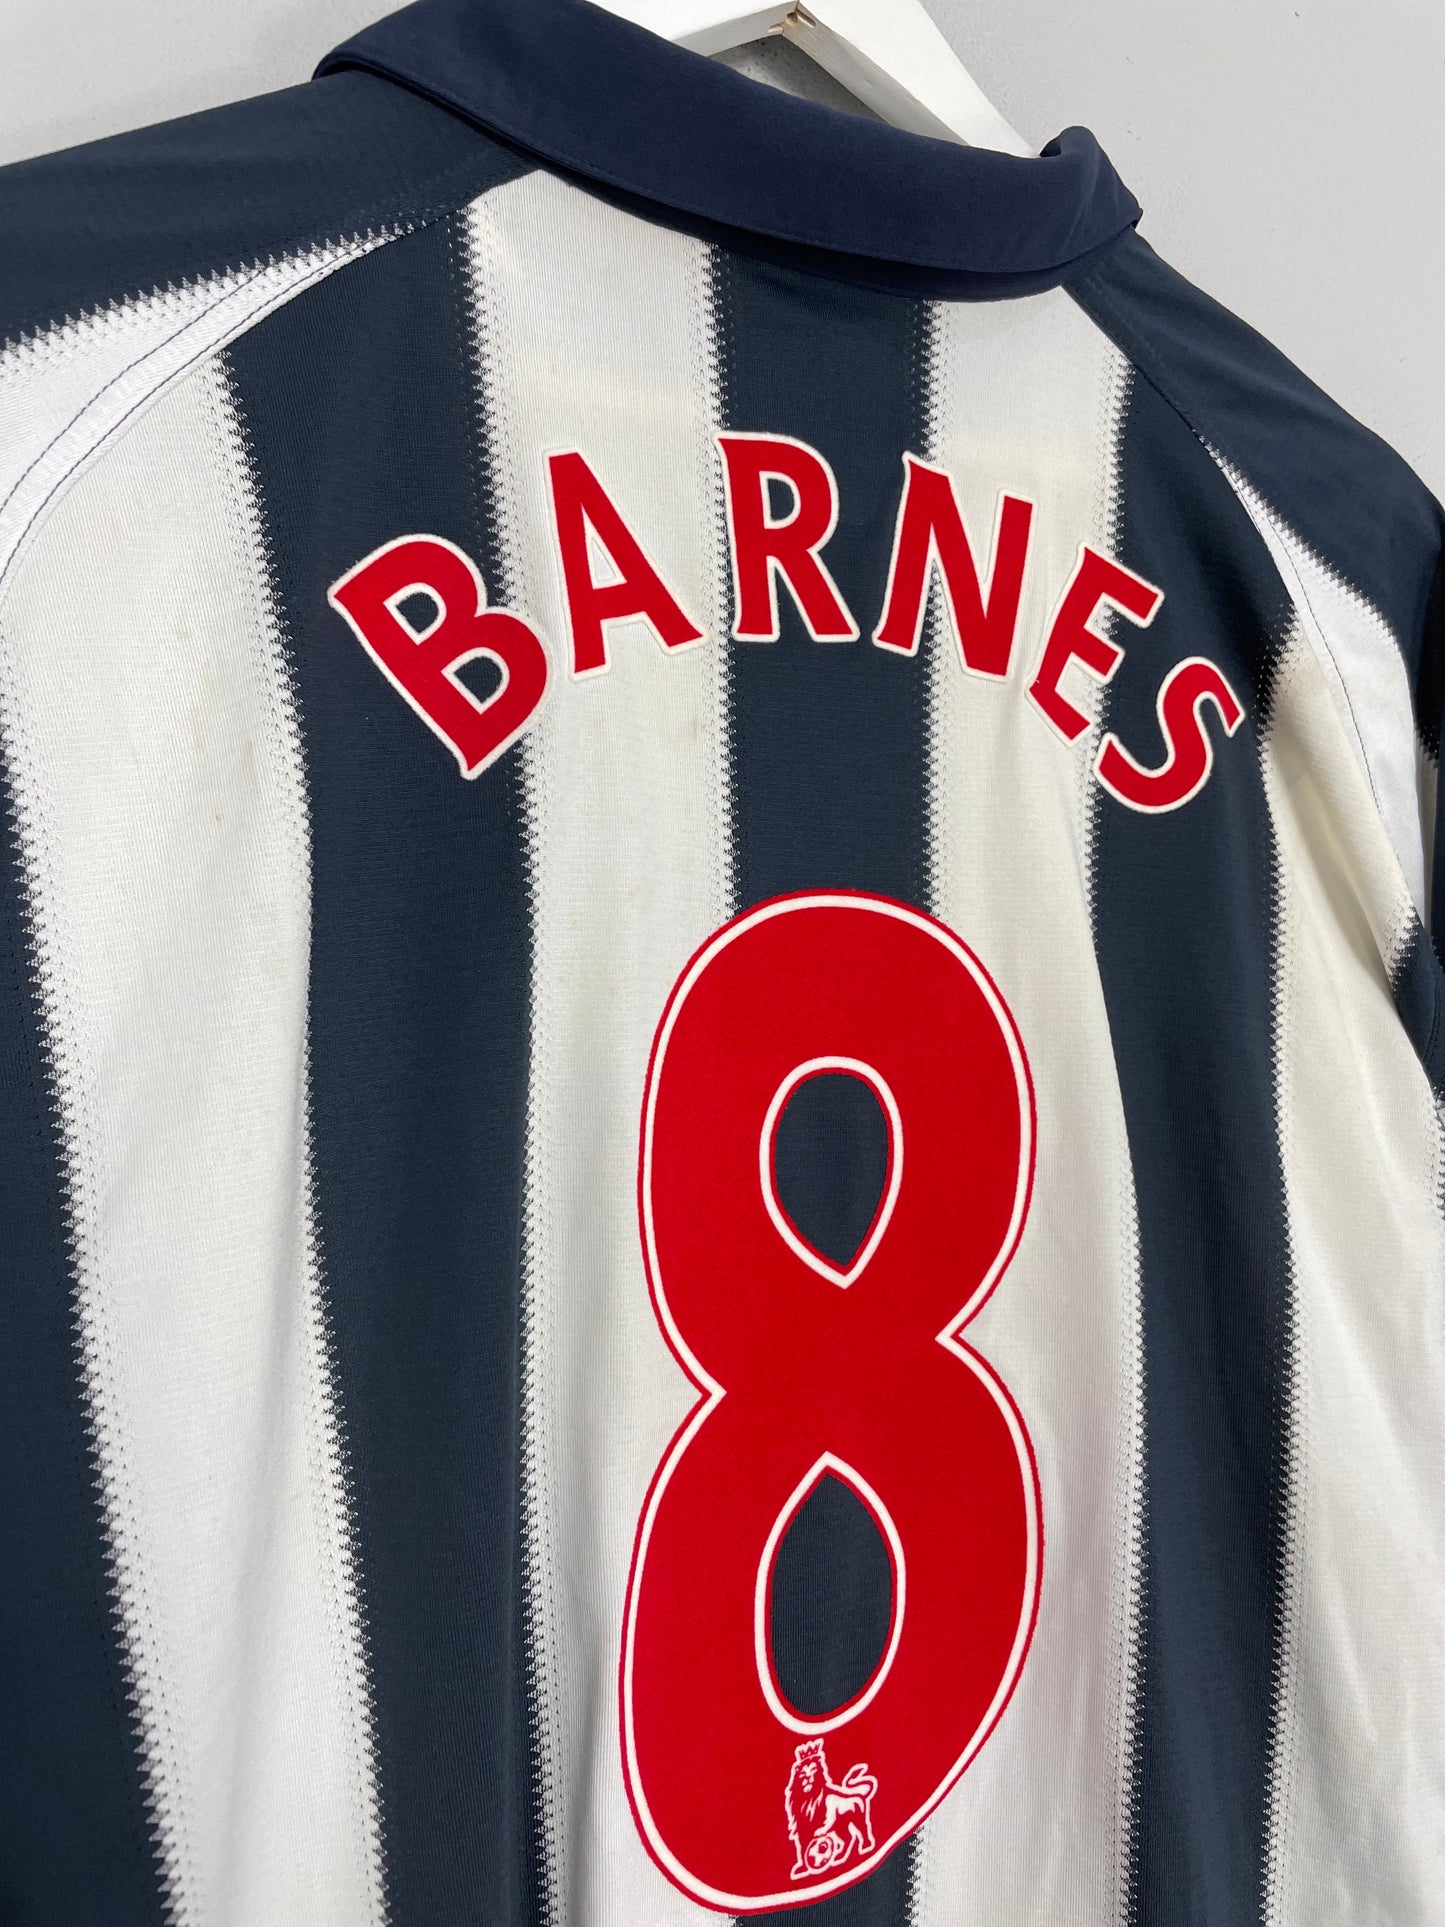 2010/11 WEST BROM BARNES #8 *MATCH ISSUE* HOME SHIRT (L) UMBRO